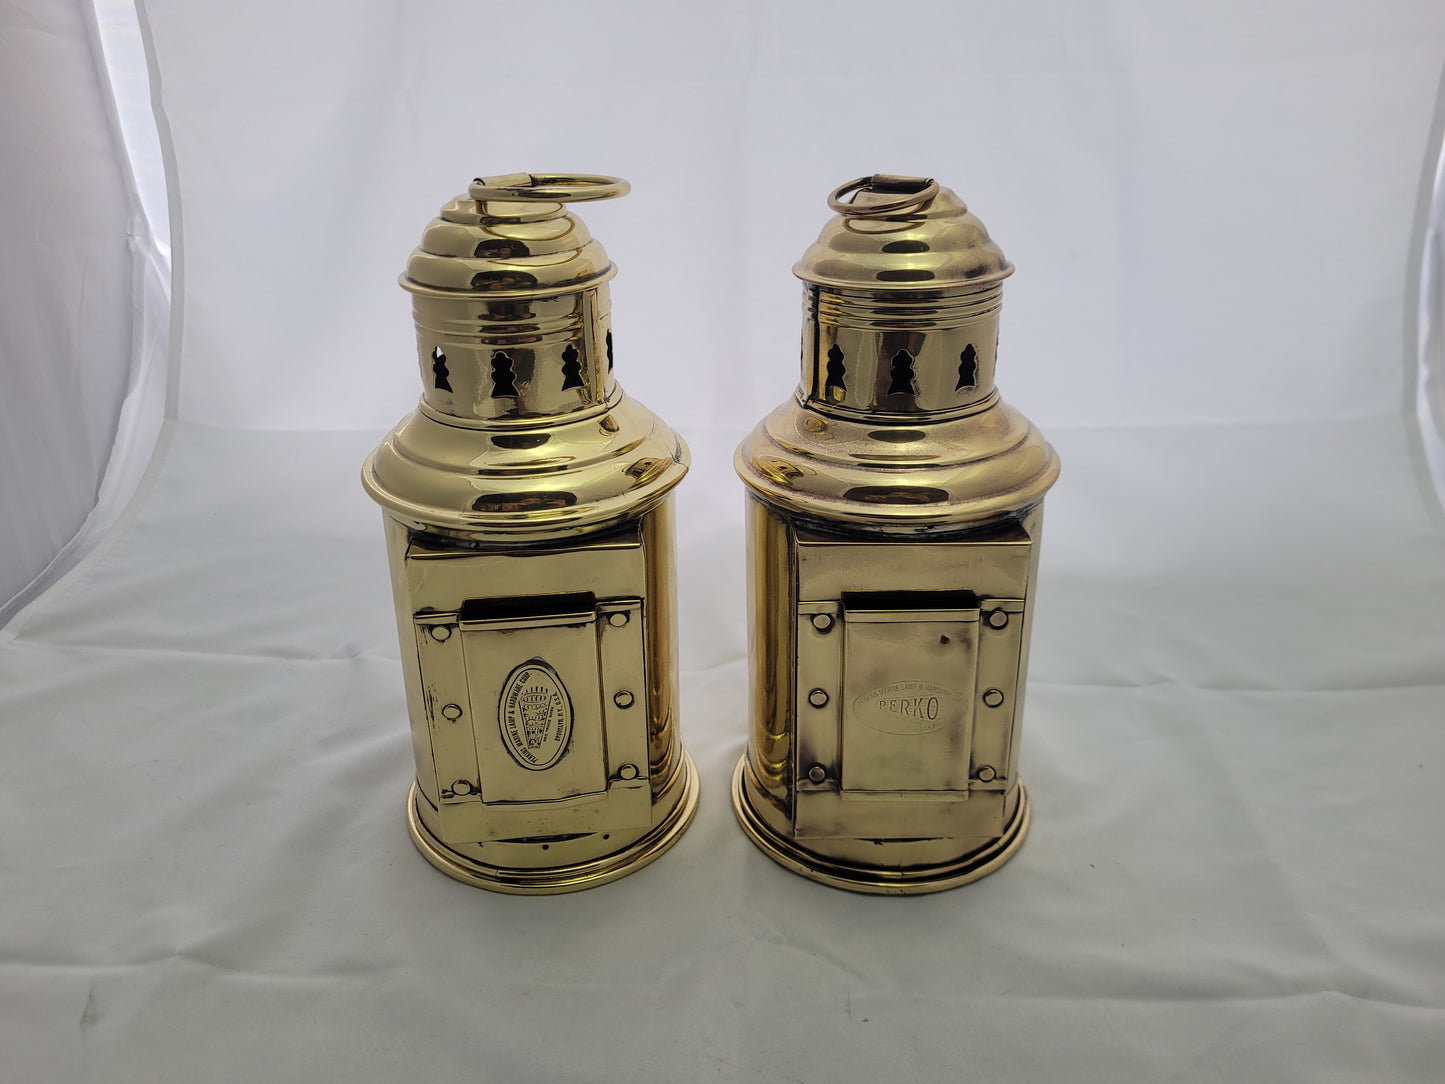 Port and Starboard boat Lanterns by Perko